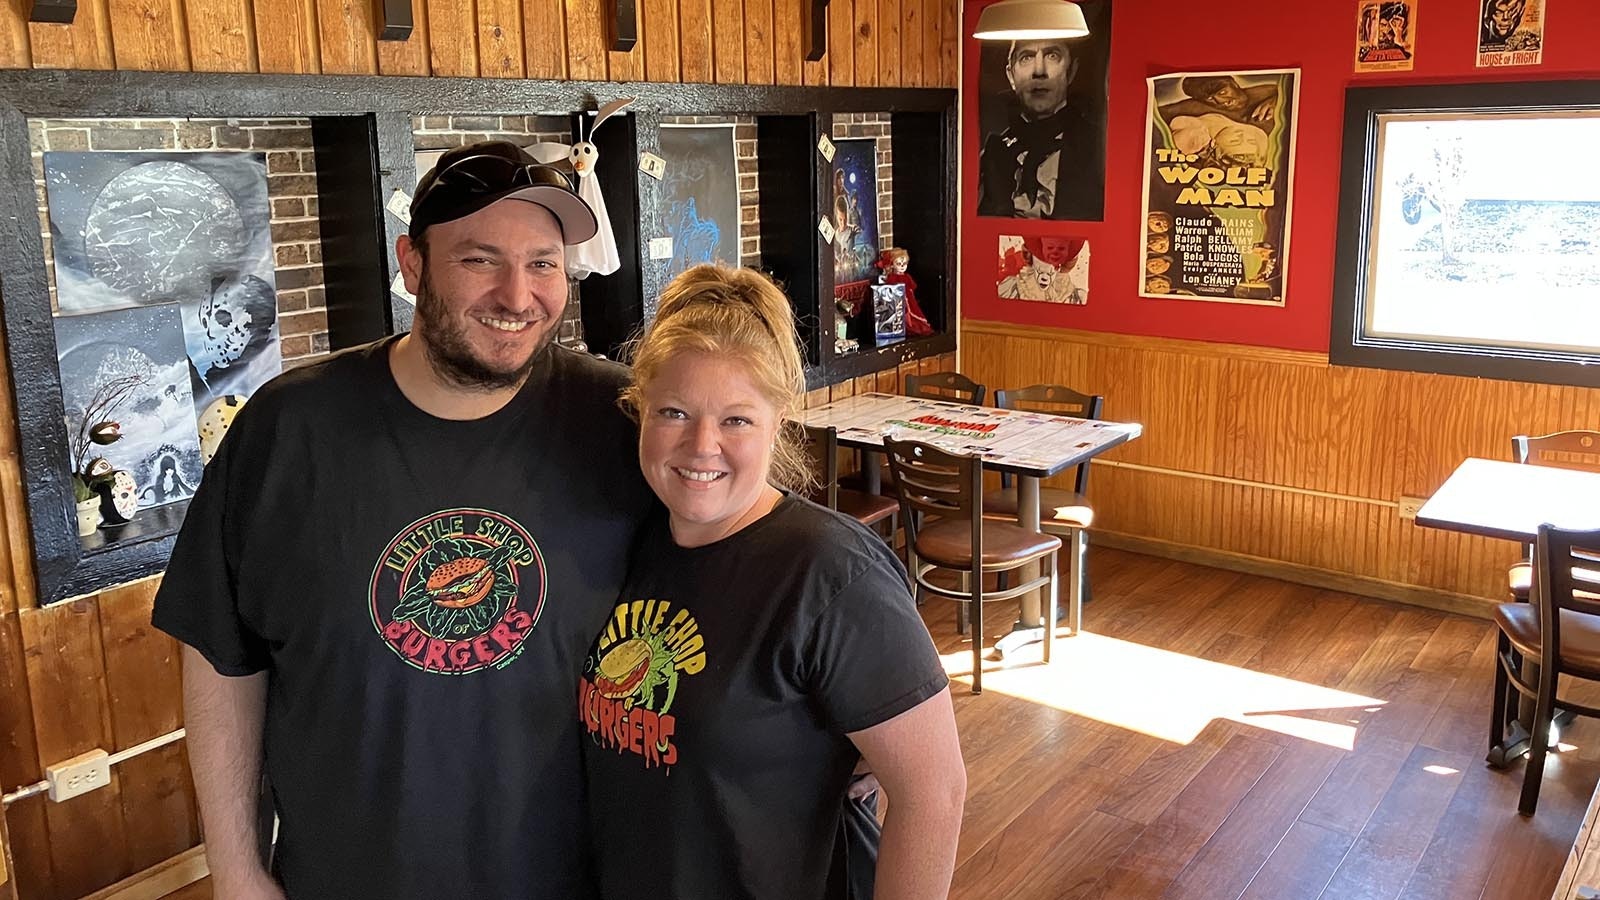 Trevor Woodward and Sarah Weikum launched “Little Shop of Burgers” in Casper in 2018 and are seeing success with their horror-themed restaurant.